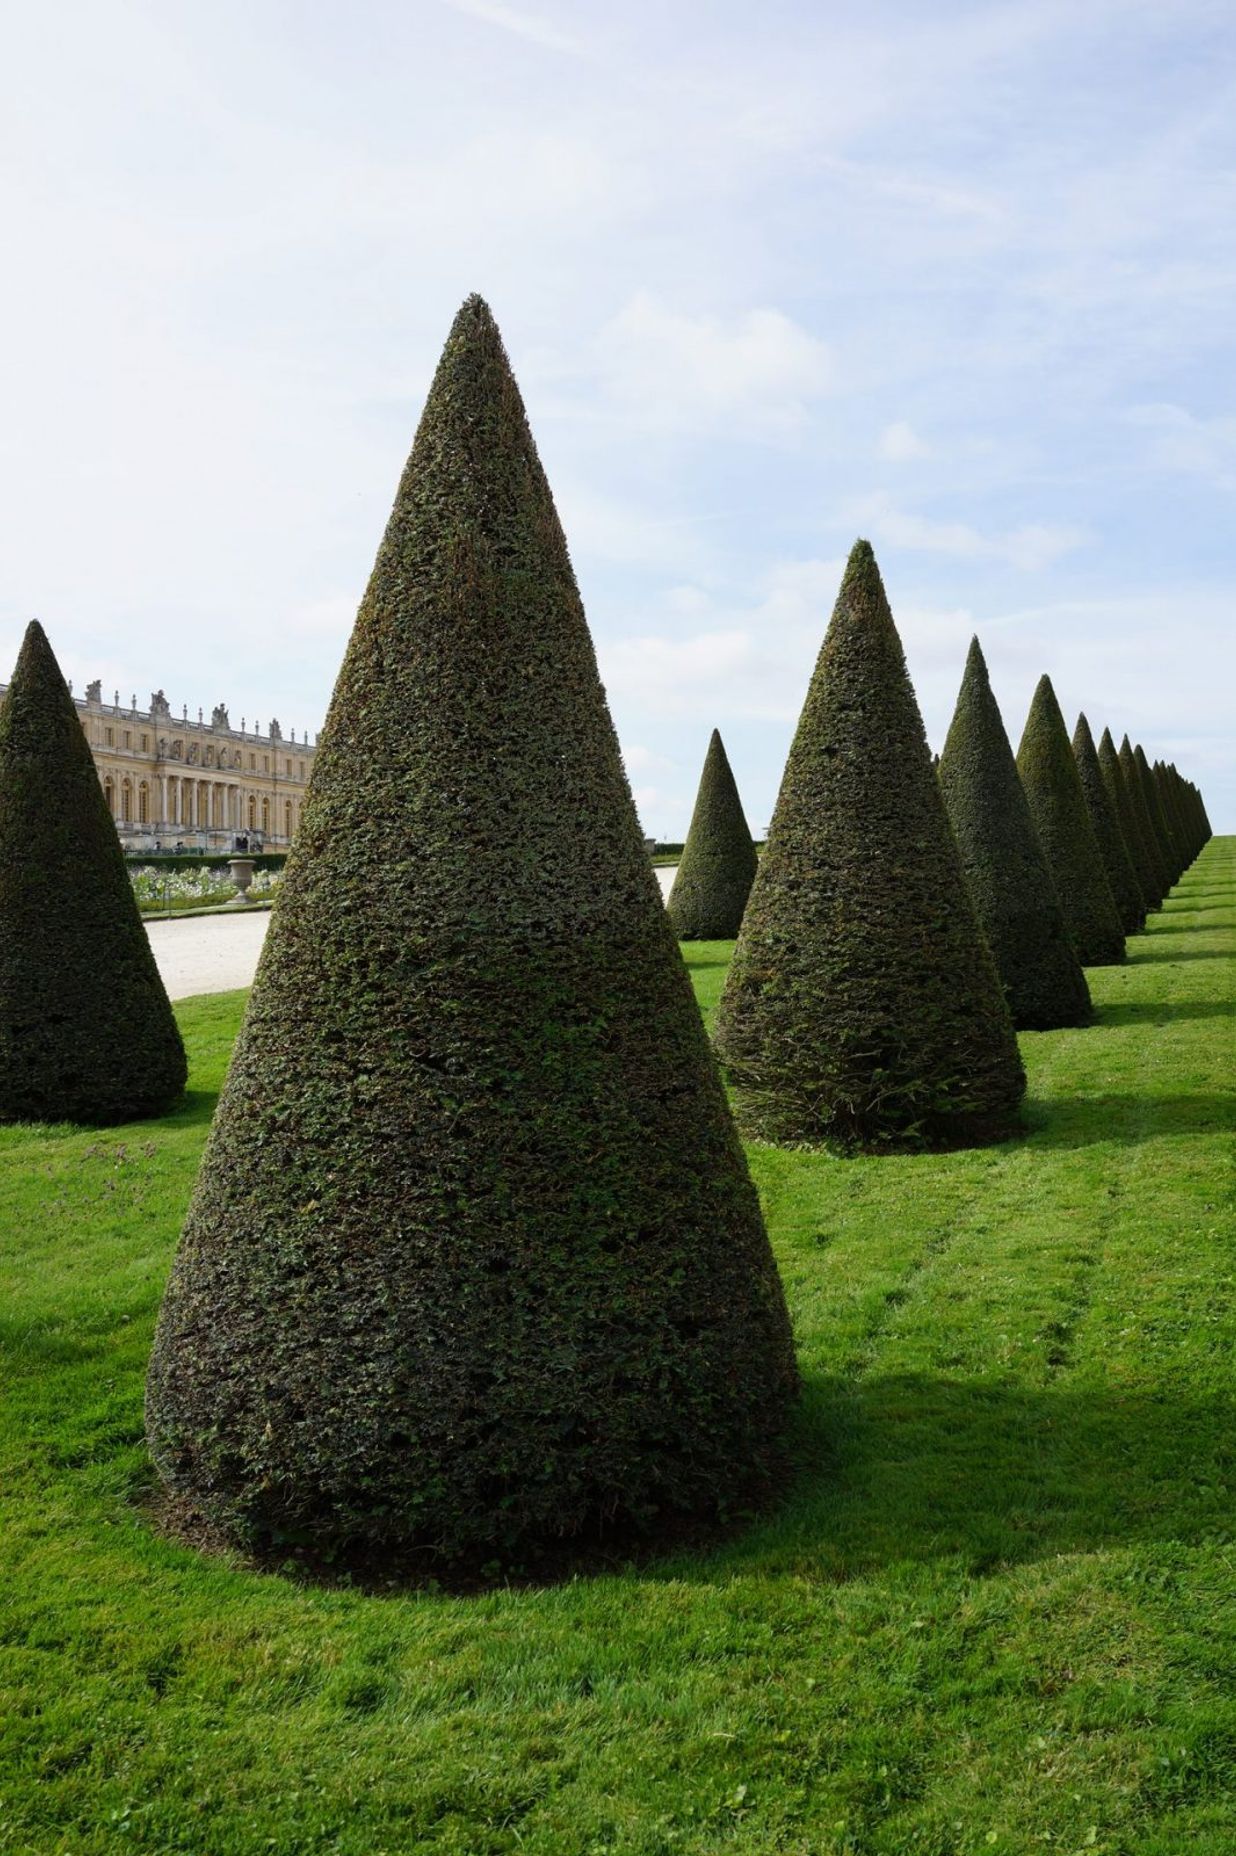 The clipped cones of Versailles